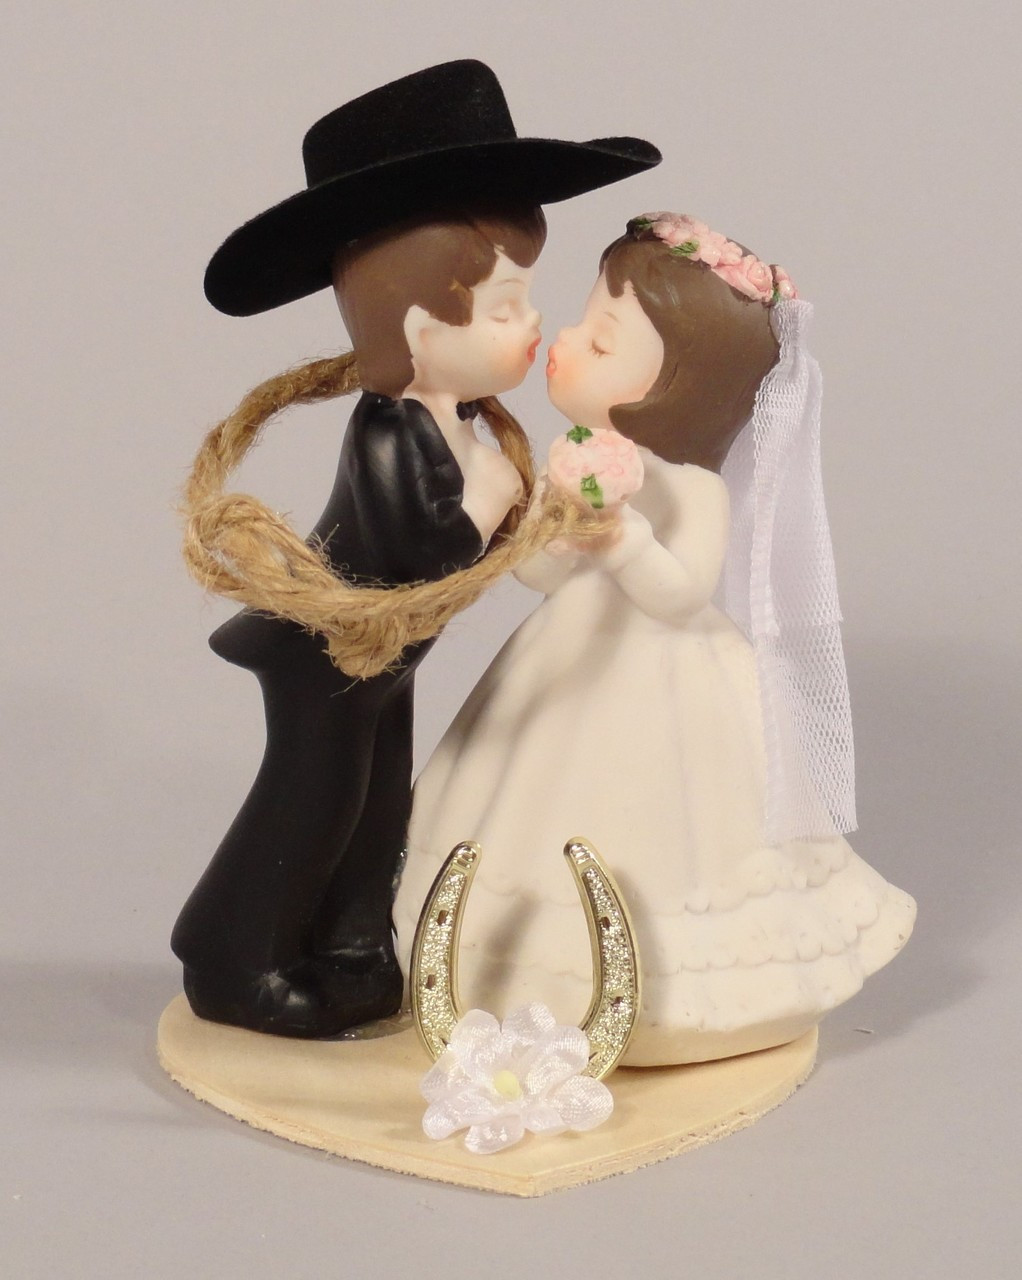 Western Wedding Kissing Couple Cake Topper or Table Decoration